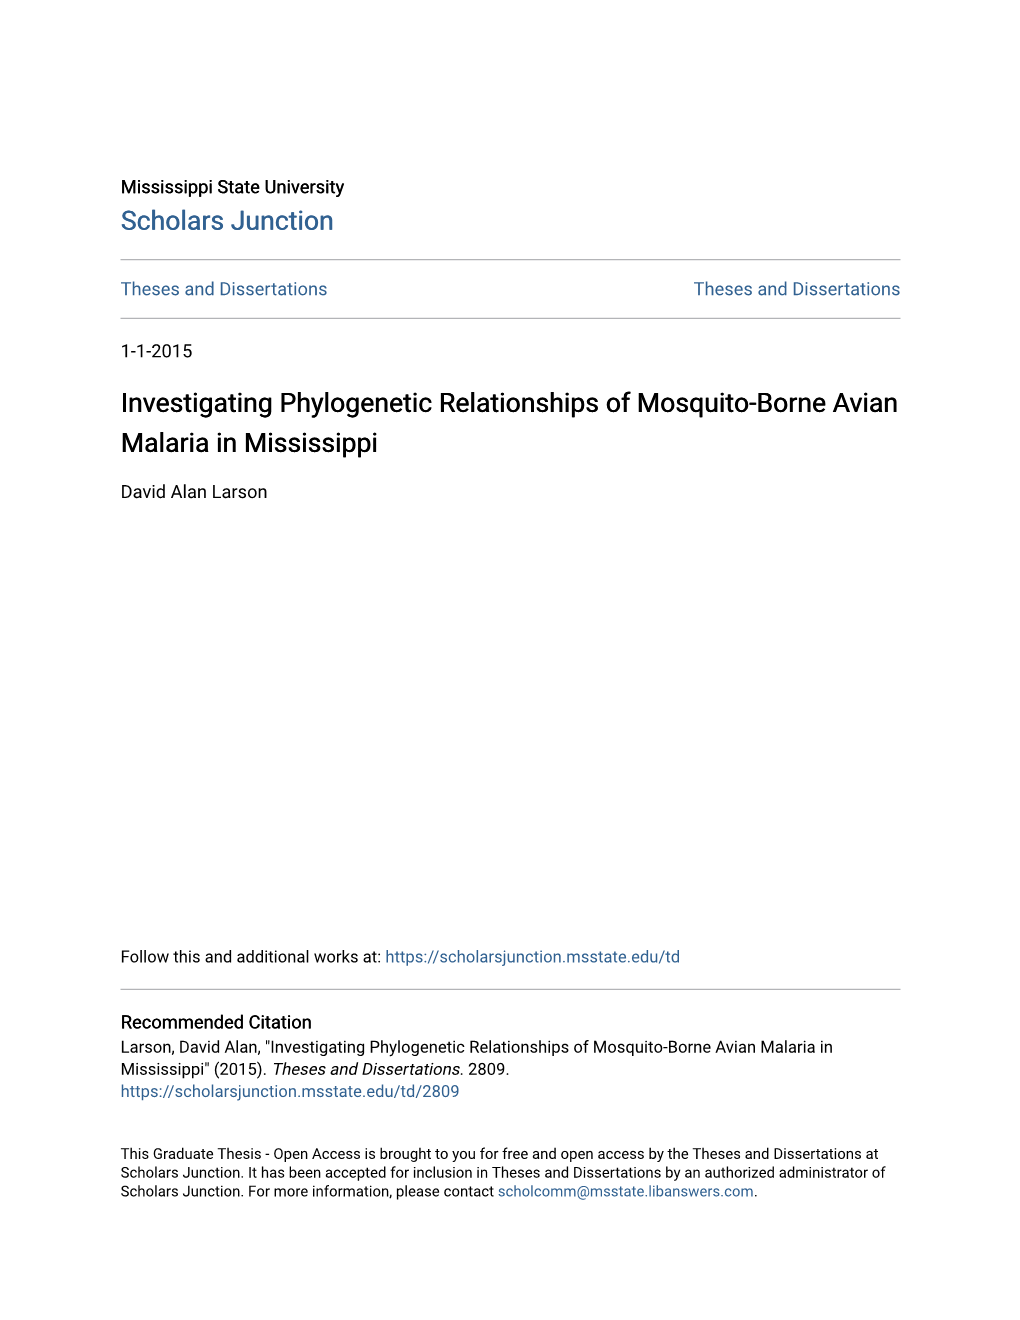 Investigating Phylogenetic Relationships of Mosquito-Borne Avian Malaria in Mississippi